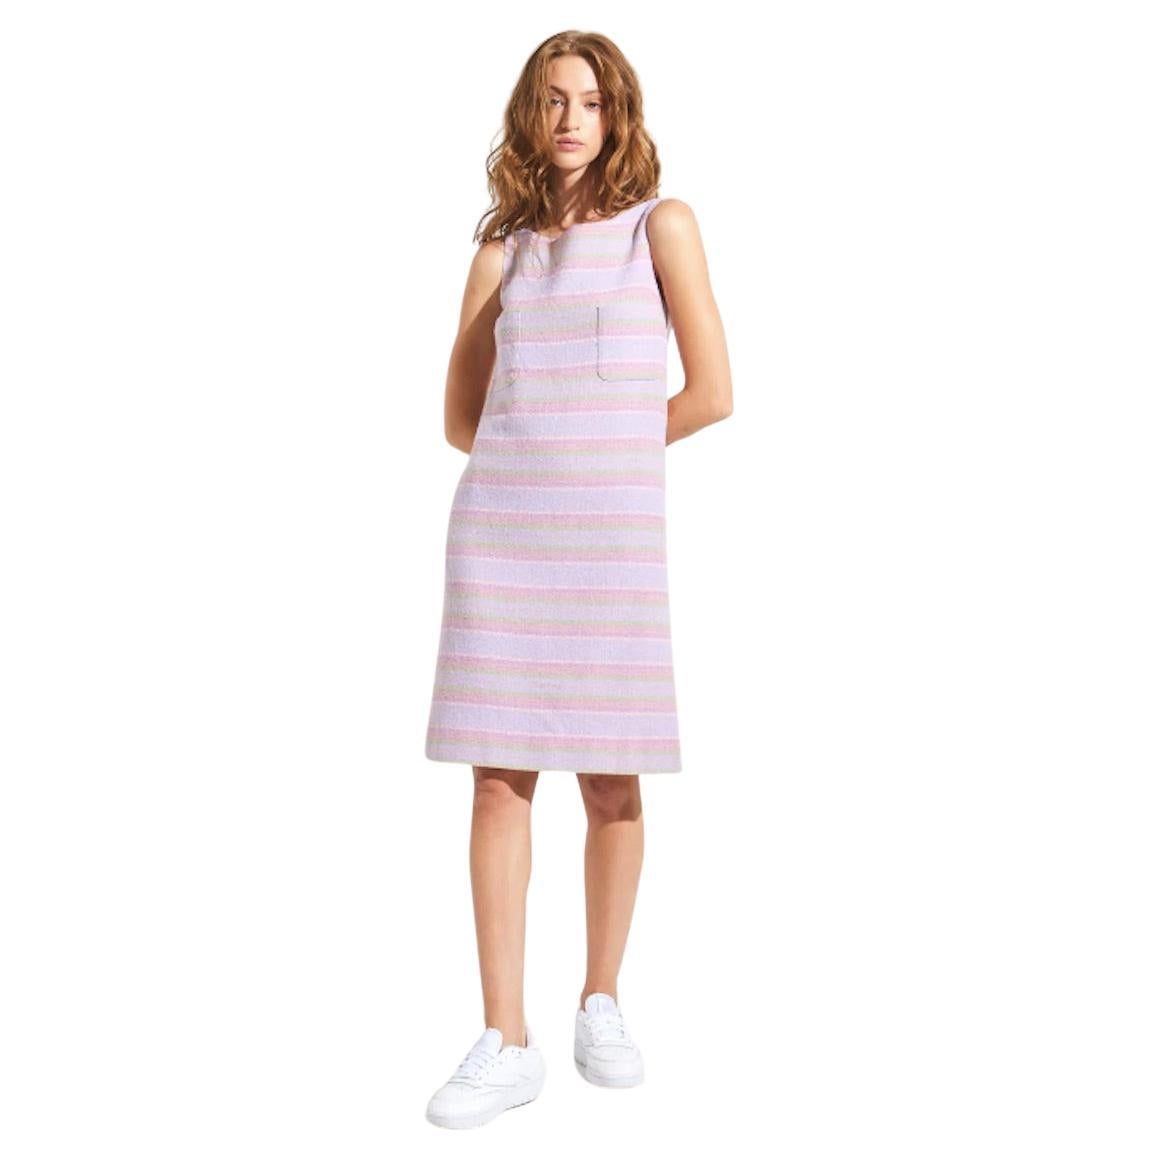 Chanel Cruise Dress - 57 For Sale on 1stDibs